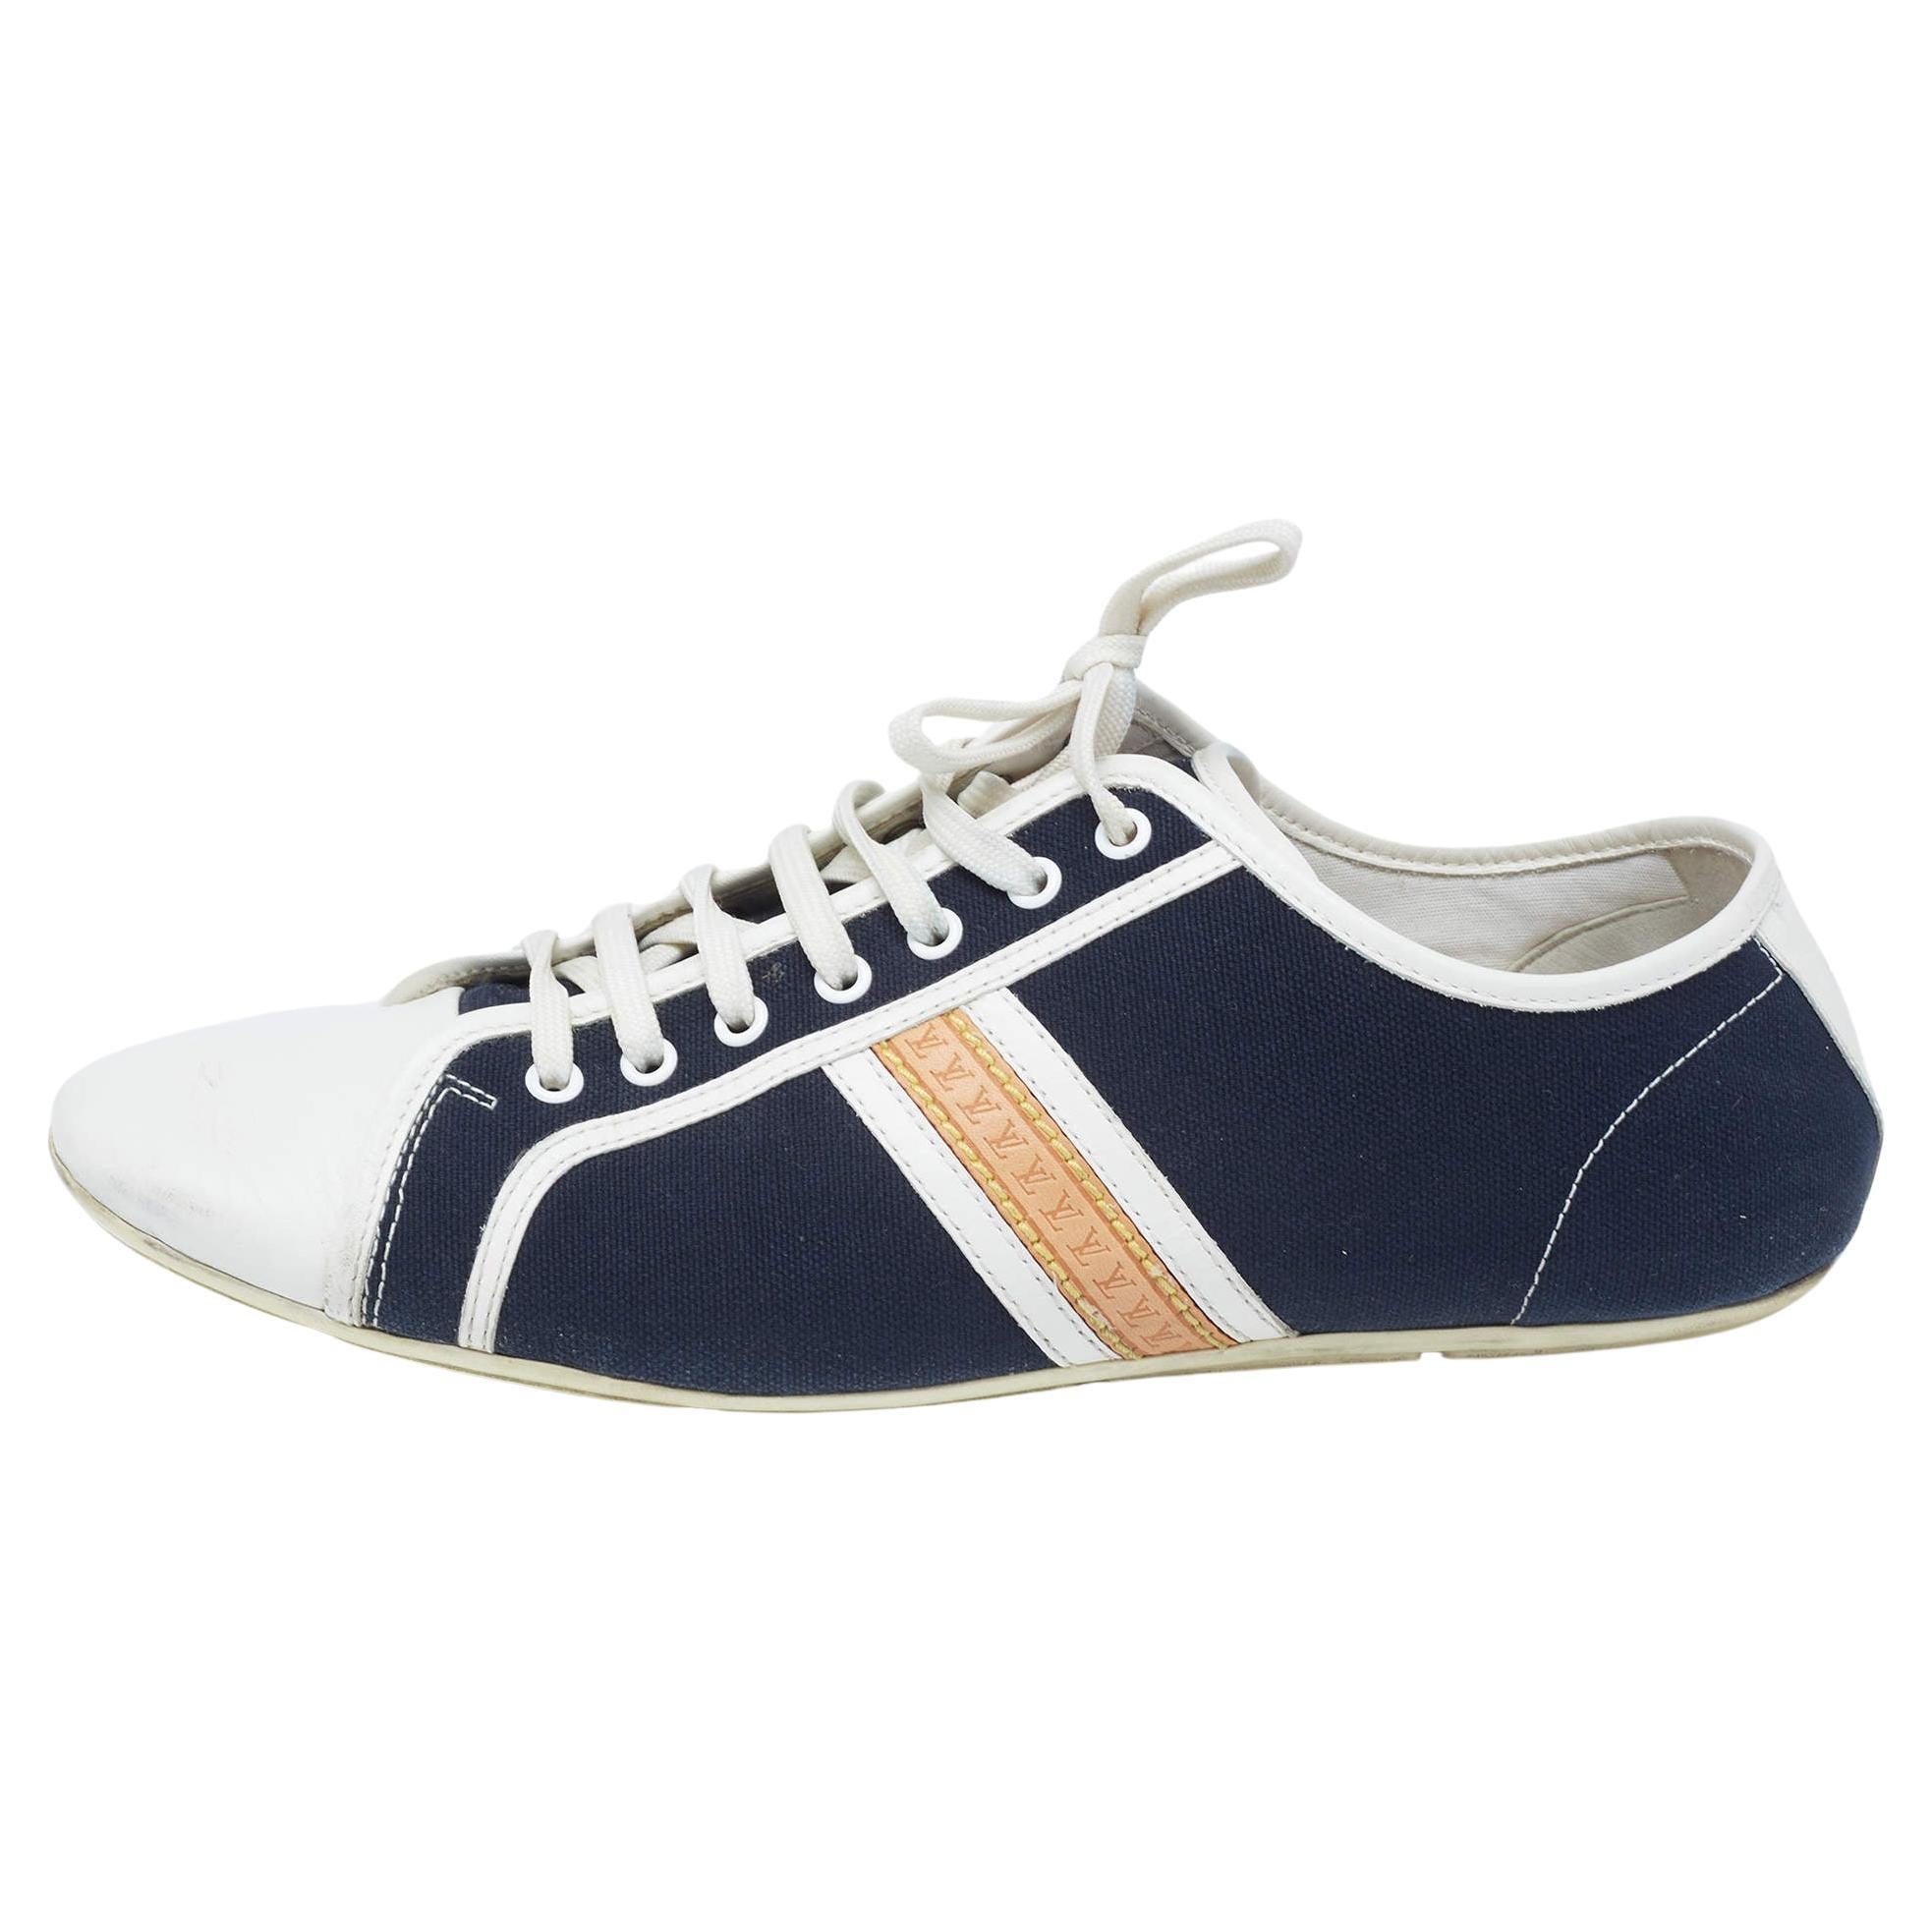 Louis Vuitton Navy Blue/White Canvas and Leather Low Top Sneakers Size 42.5 For Sale